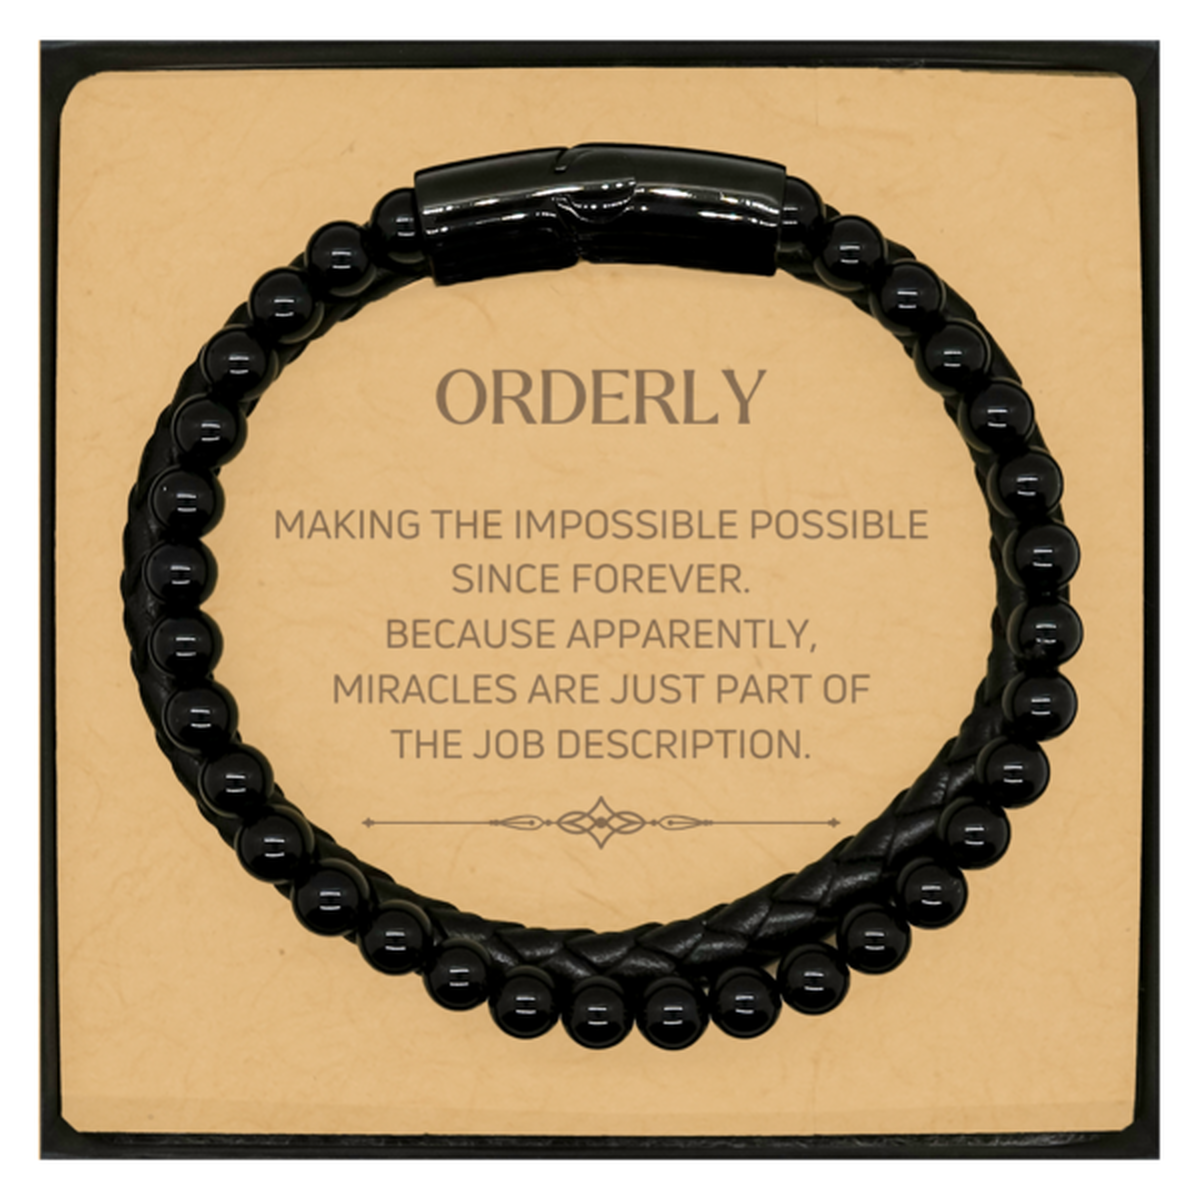 Funny Orderly Gifts, Miracles are just part of the job description, Inspirational Birthday Christmas Stone Leather Bracelets For Orderly, Men, Women, Coworkers, Friends, Boss